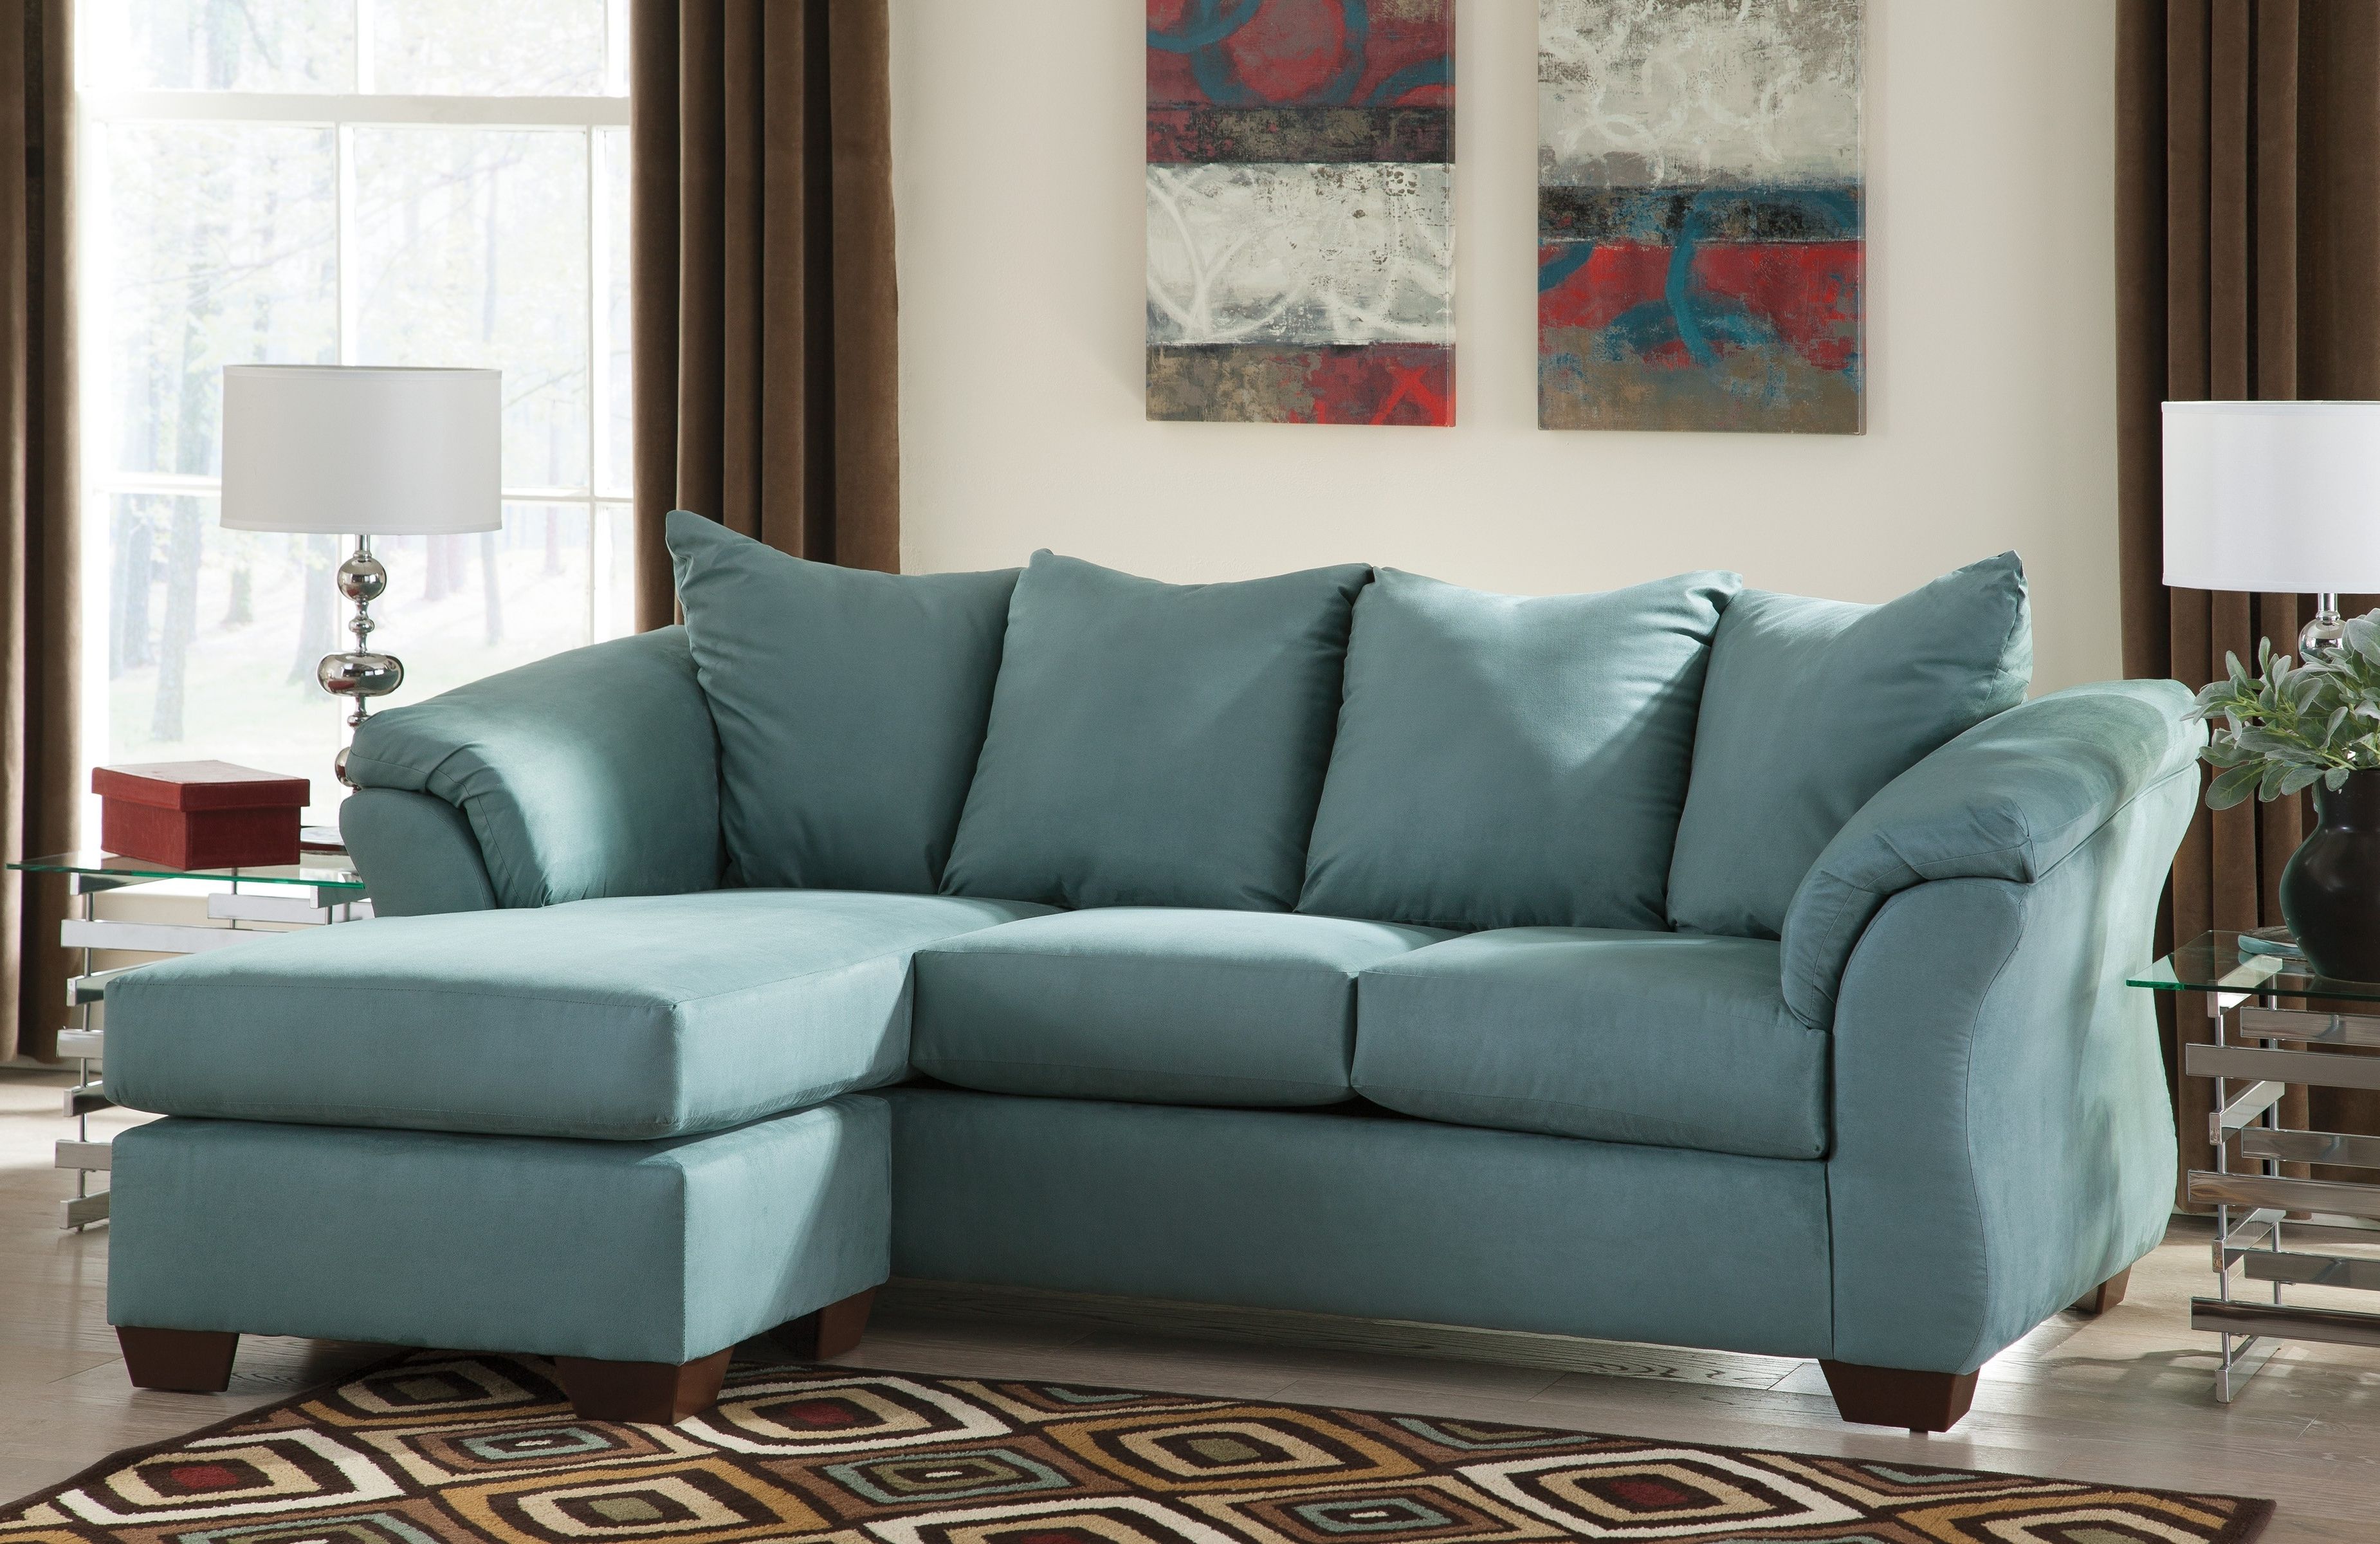 Preferred Ashley 7500618 Darcy Sky Blue Finish Fabric Upholstered Sofa Chaise Regarding Ashley Chaises (View 10 of 15)